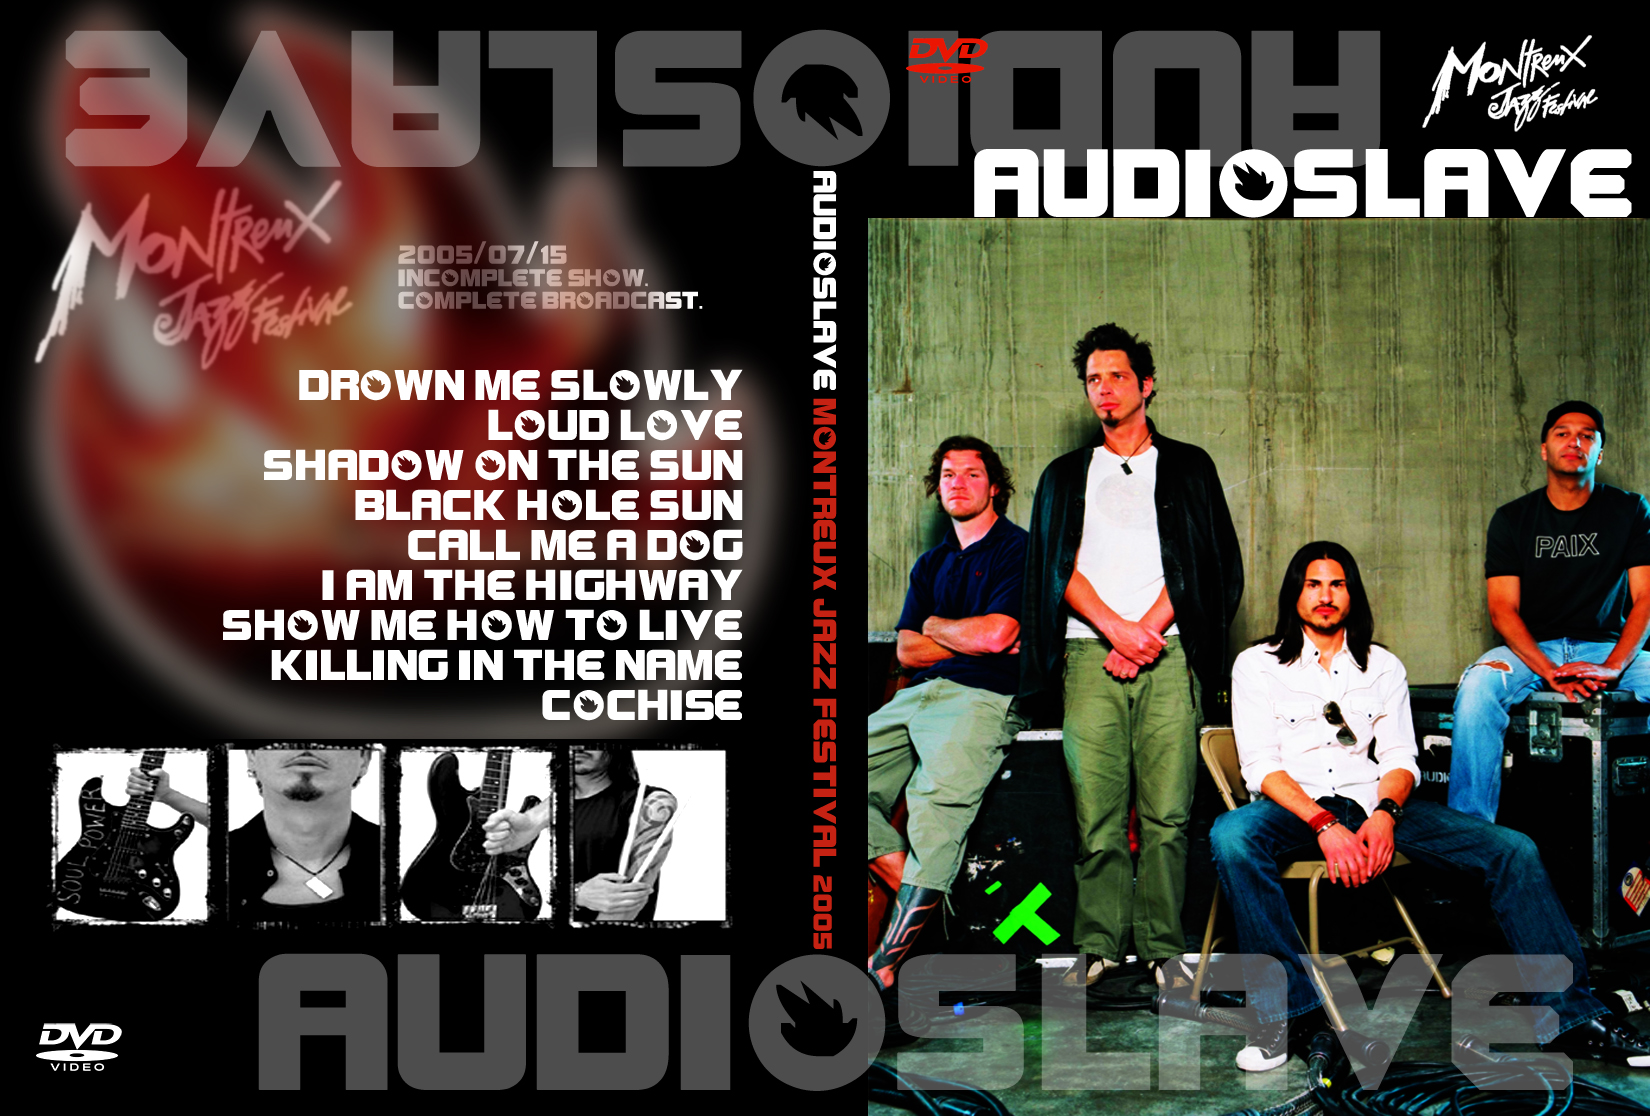 audioslave - show me how to live